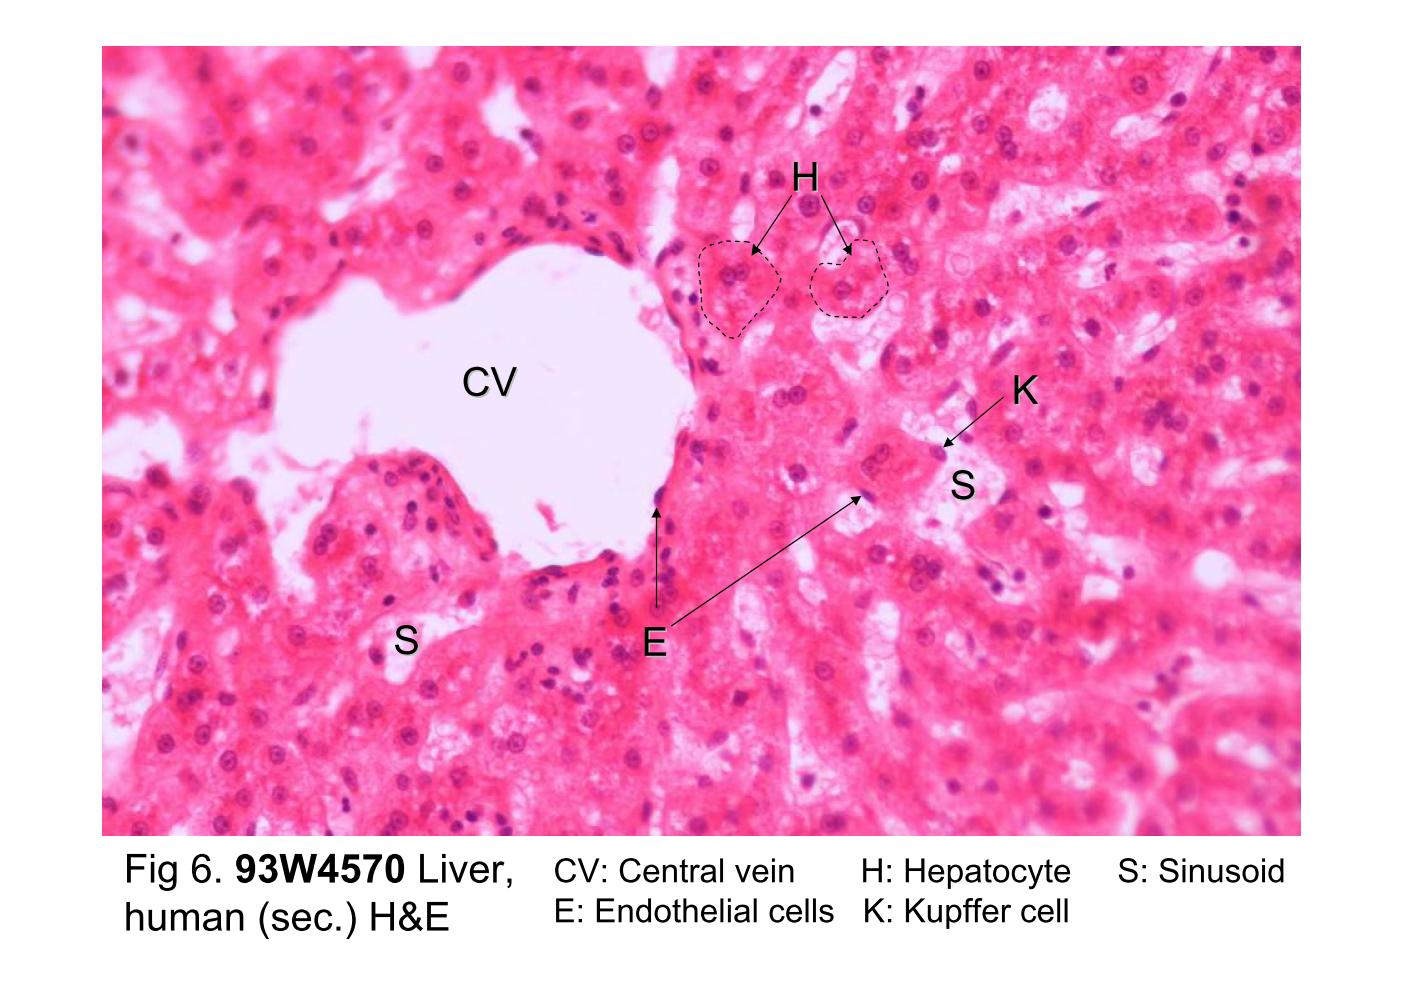 block10-2_15.jpg - Fig 6. 93W4570, Liver, human (sec.) H&E.The central vein (CV) and surrounding hepatocytes (H) areshown in this figure at high magnification. Hepatocytes are largepolyhedral cells with round nuclei and are arranged in one-cell-thick plates. The plates of the hepatocytes exhibit a radialarrangement toward the central vein. The sinusoid (S) appearsas light areas between the cords of the hepatic cells. The cellsthat line the sinusoids are endothelial cells (E) [squamous cell,elongated nuclei] and Kupffer cells (K) [ovoid nuclei].If you examine the outer surface of this slide, you would find thetissue is covered by a capsule composed of collagenous tissuecalled Glisson's capsule. Over the Glisson's capsule is a layerof mesothelial cells from the peritoneum.